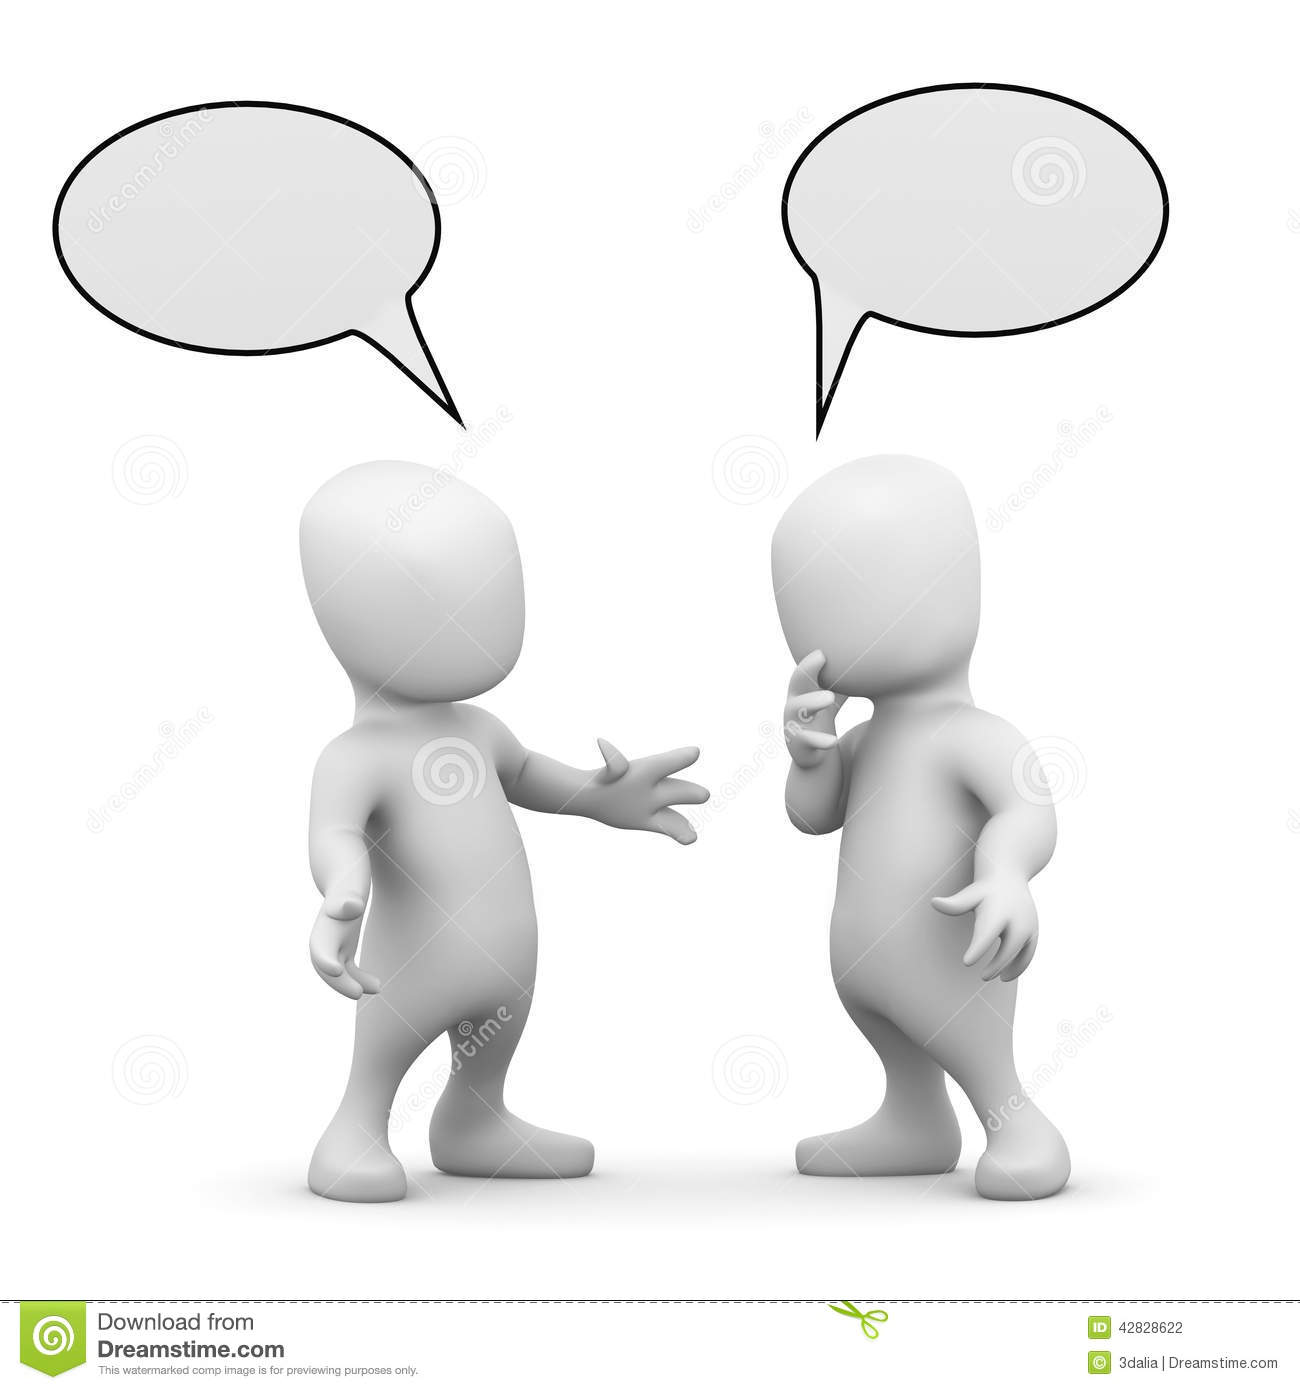 3d Render Of Two Little People Talking To Each Other With Empty Speech